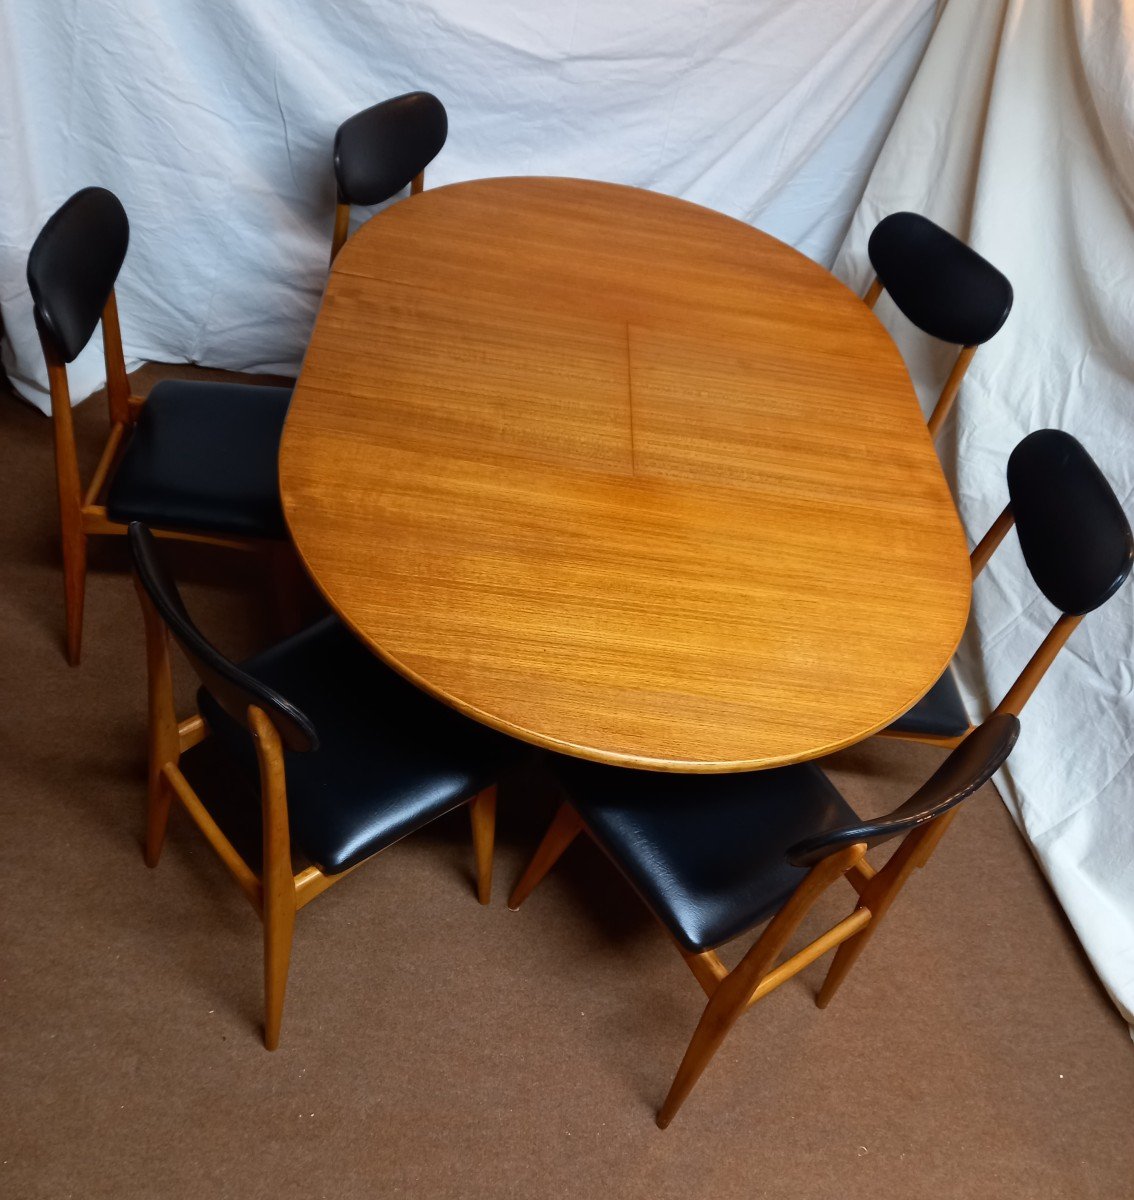 Danish Teak Table With 6 Danish Beech Chairs From The 70s